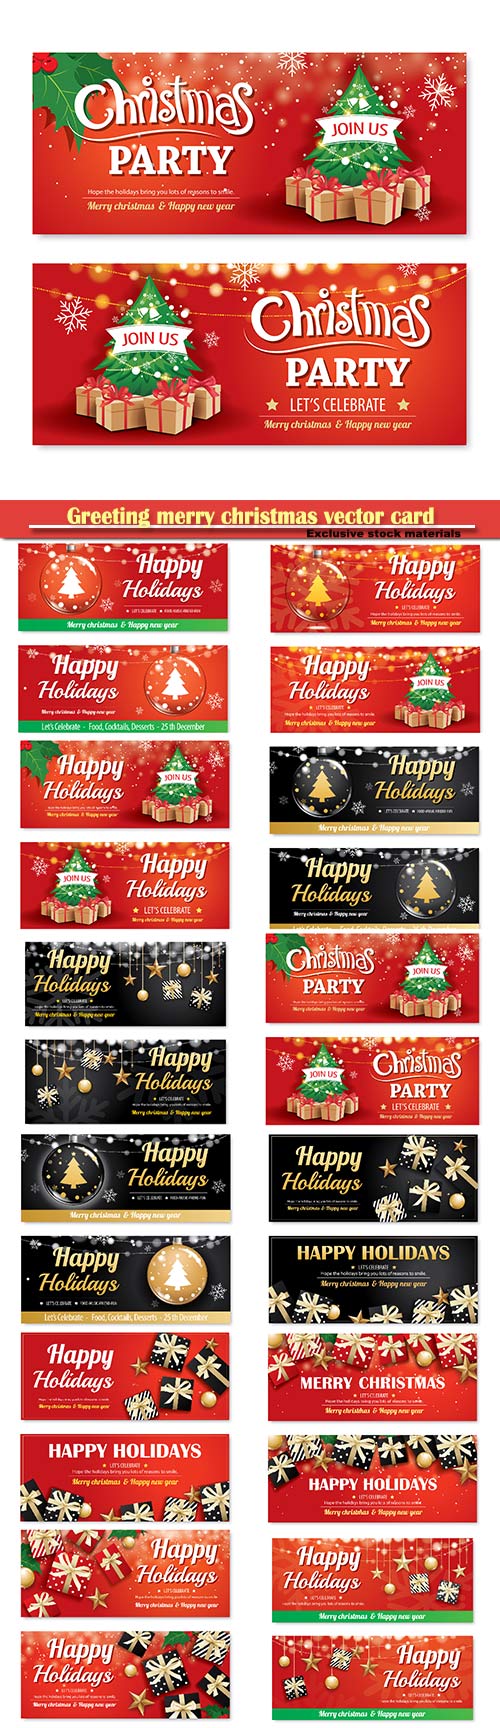 Greeting merry christmas vector card, party poster banner design template, happy holiday and new year